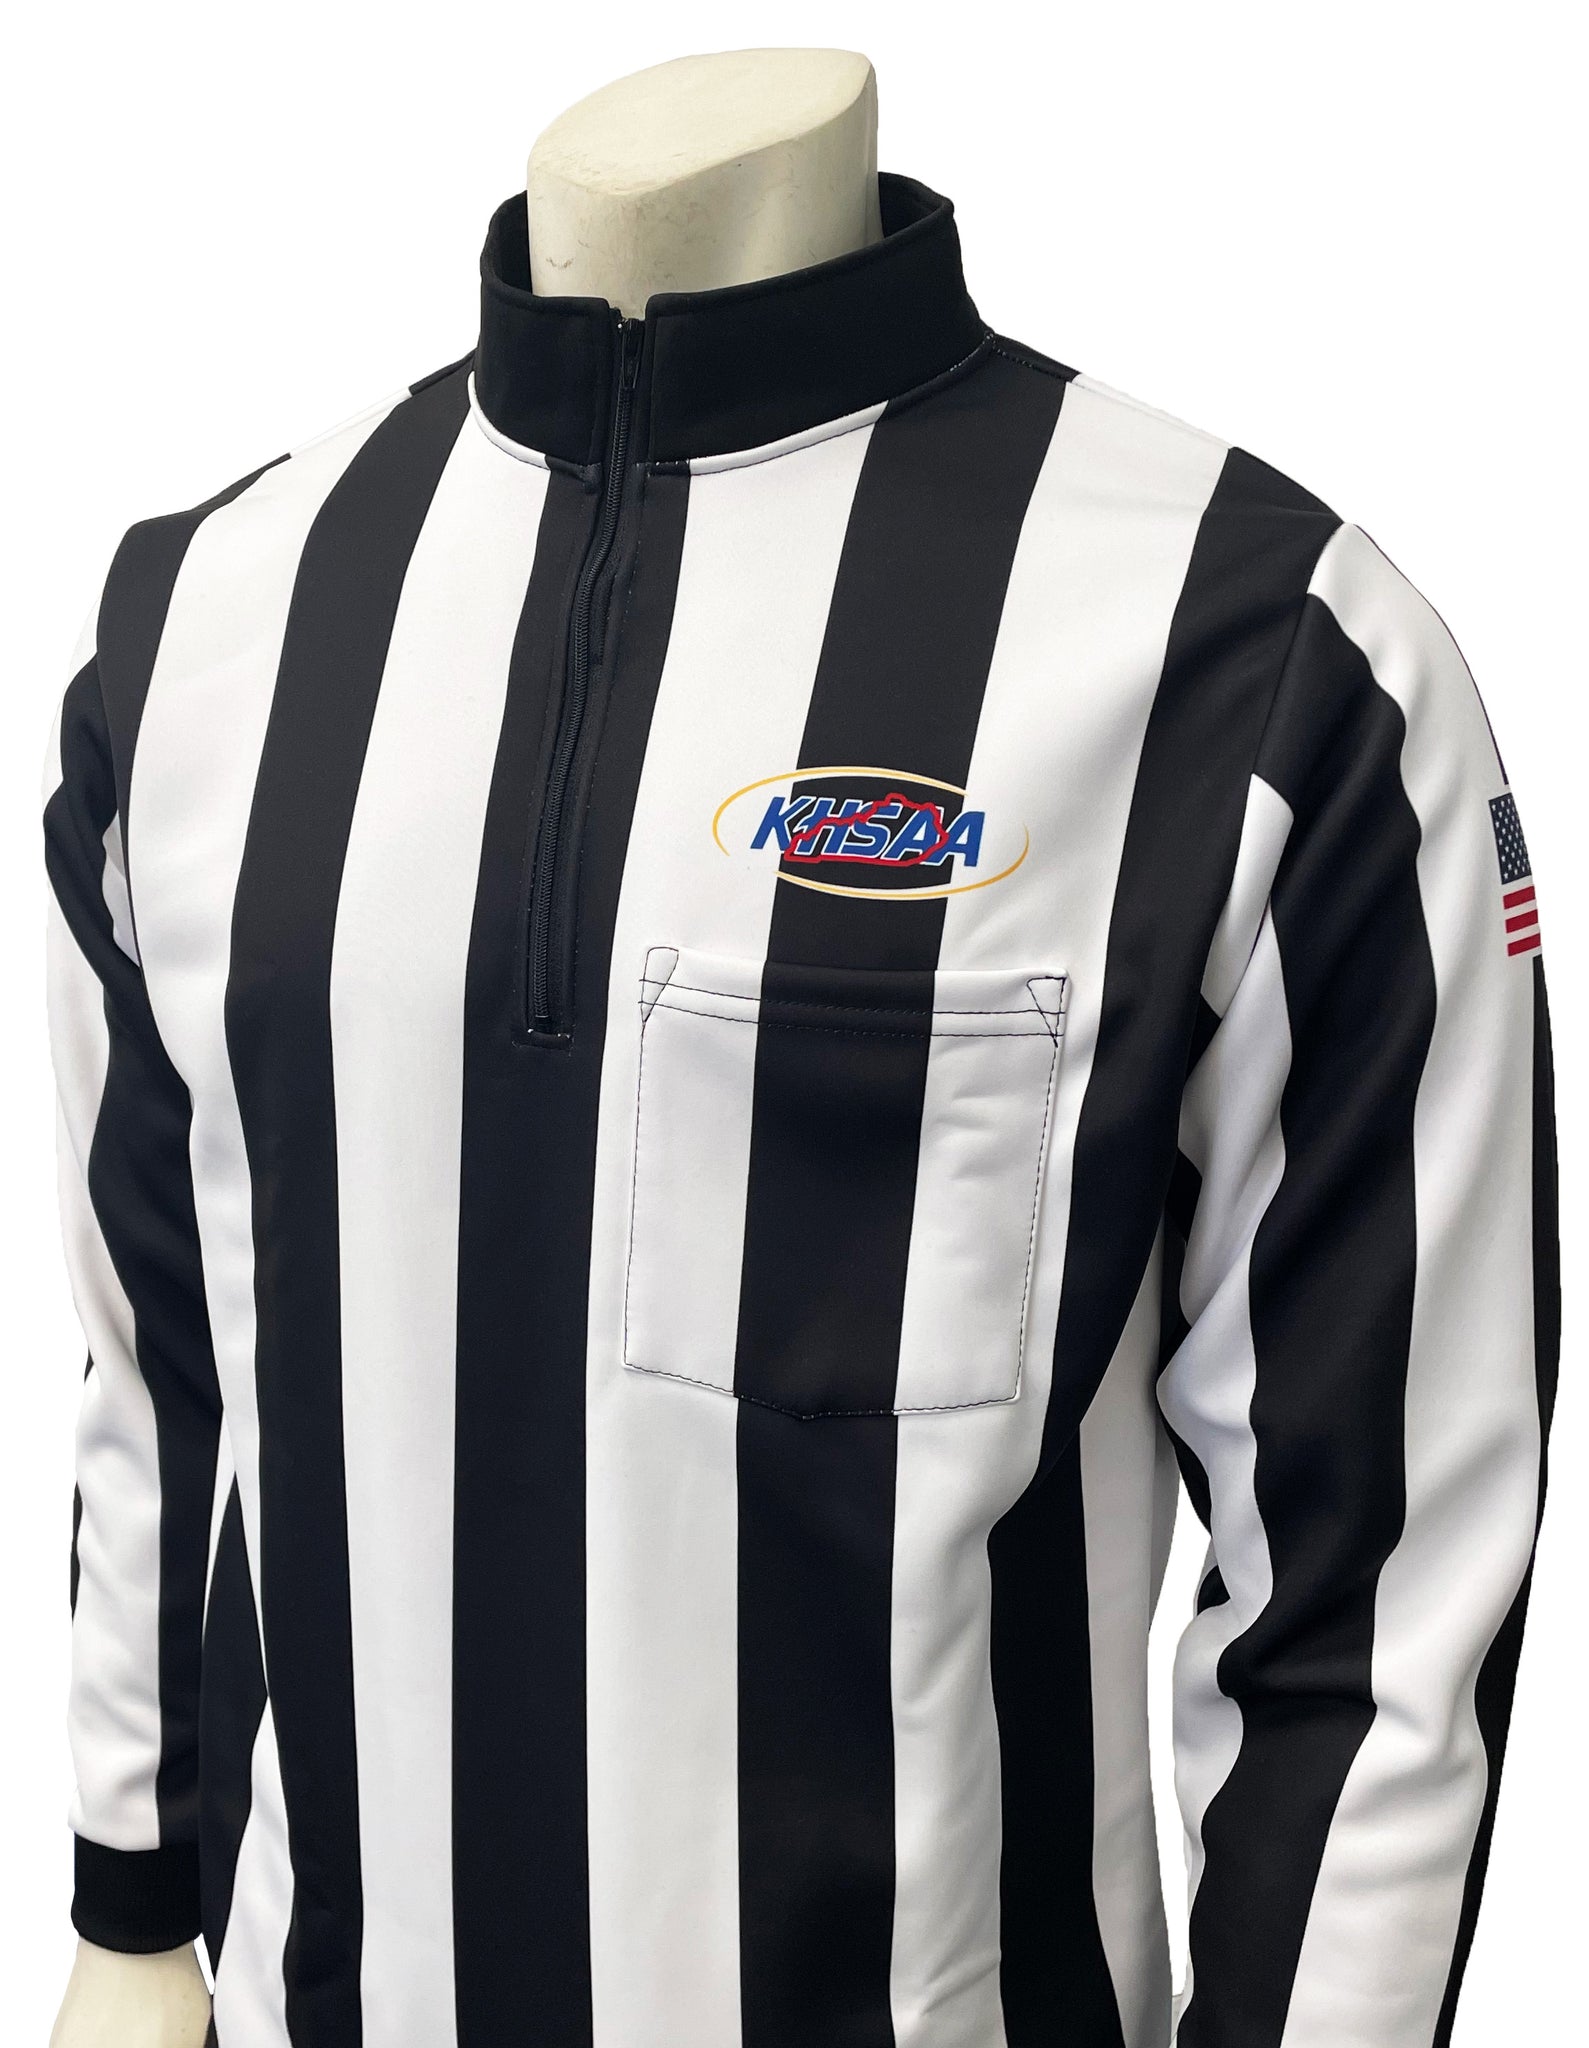 USA730KY - Smitty "Made in USA" - Football Men's Cold Weather Long Sleeve Shirt